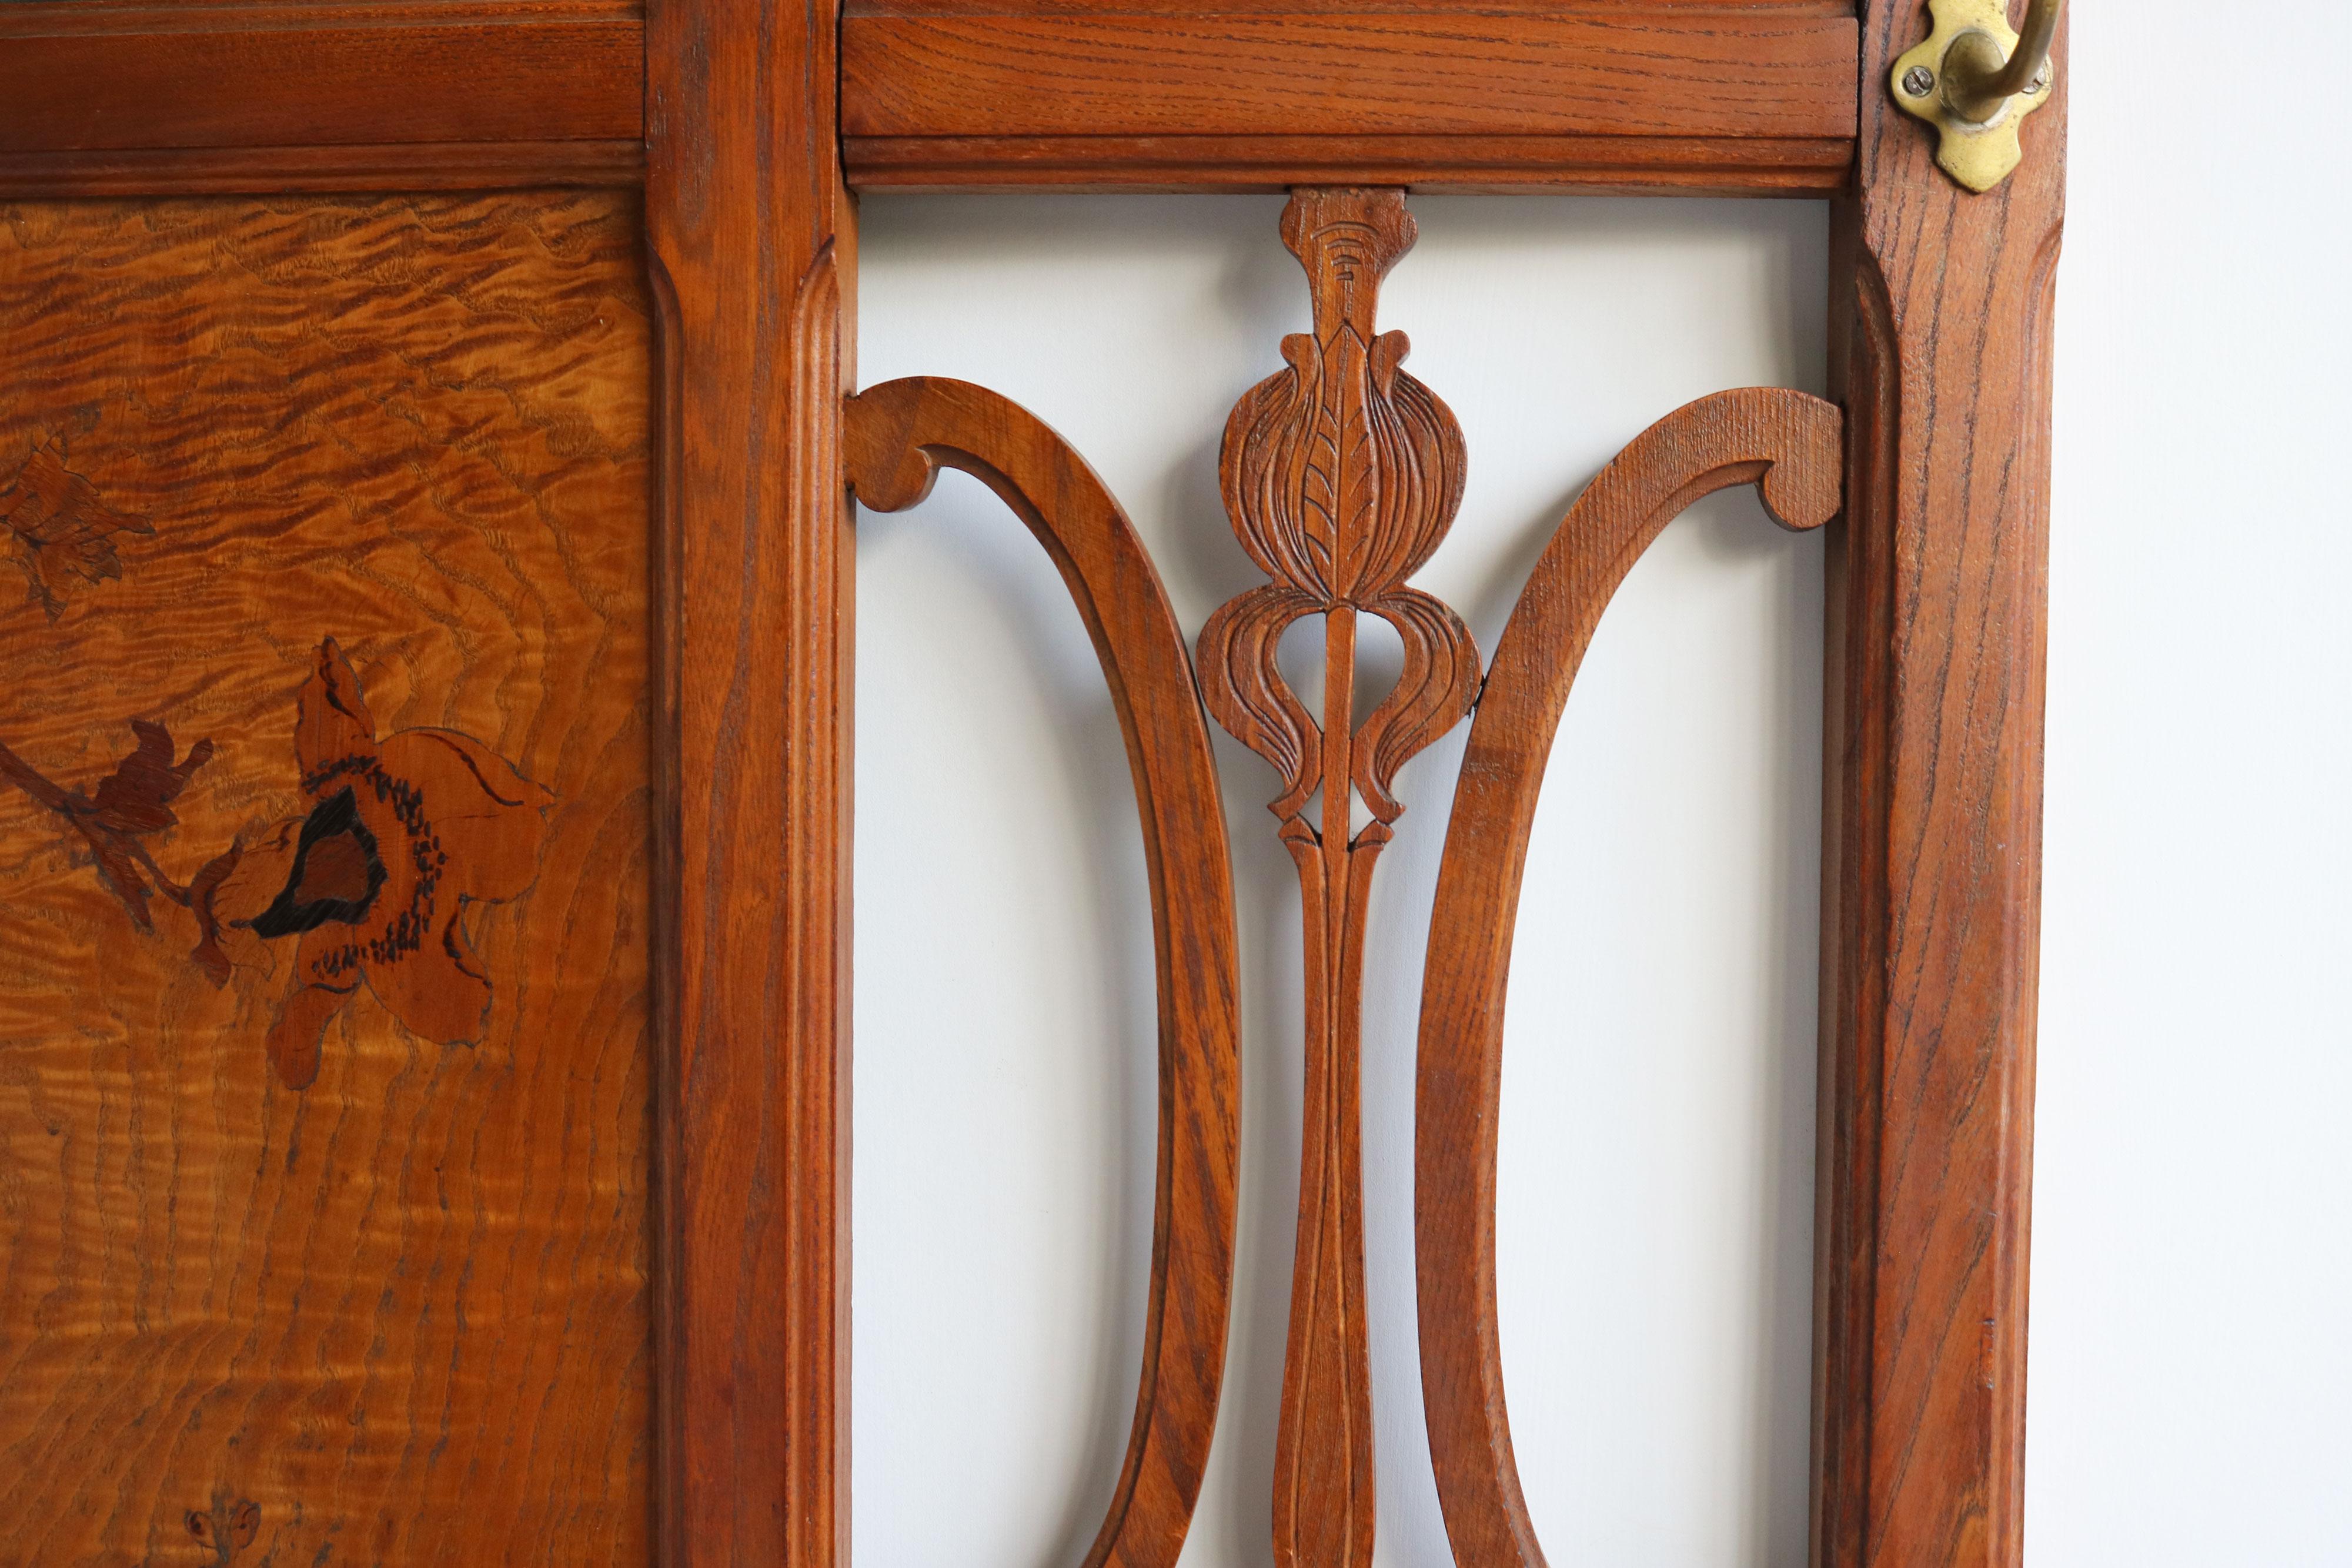 Marquetry French Art nouveau hall tree / coat rack by Emile galle 1905 marquetry hallway For Sale